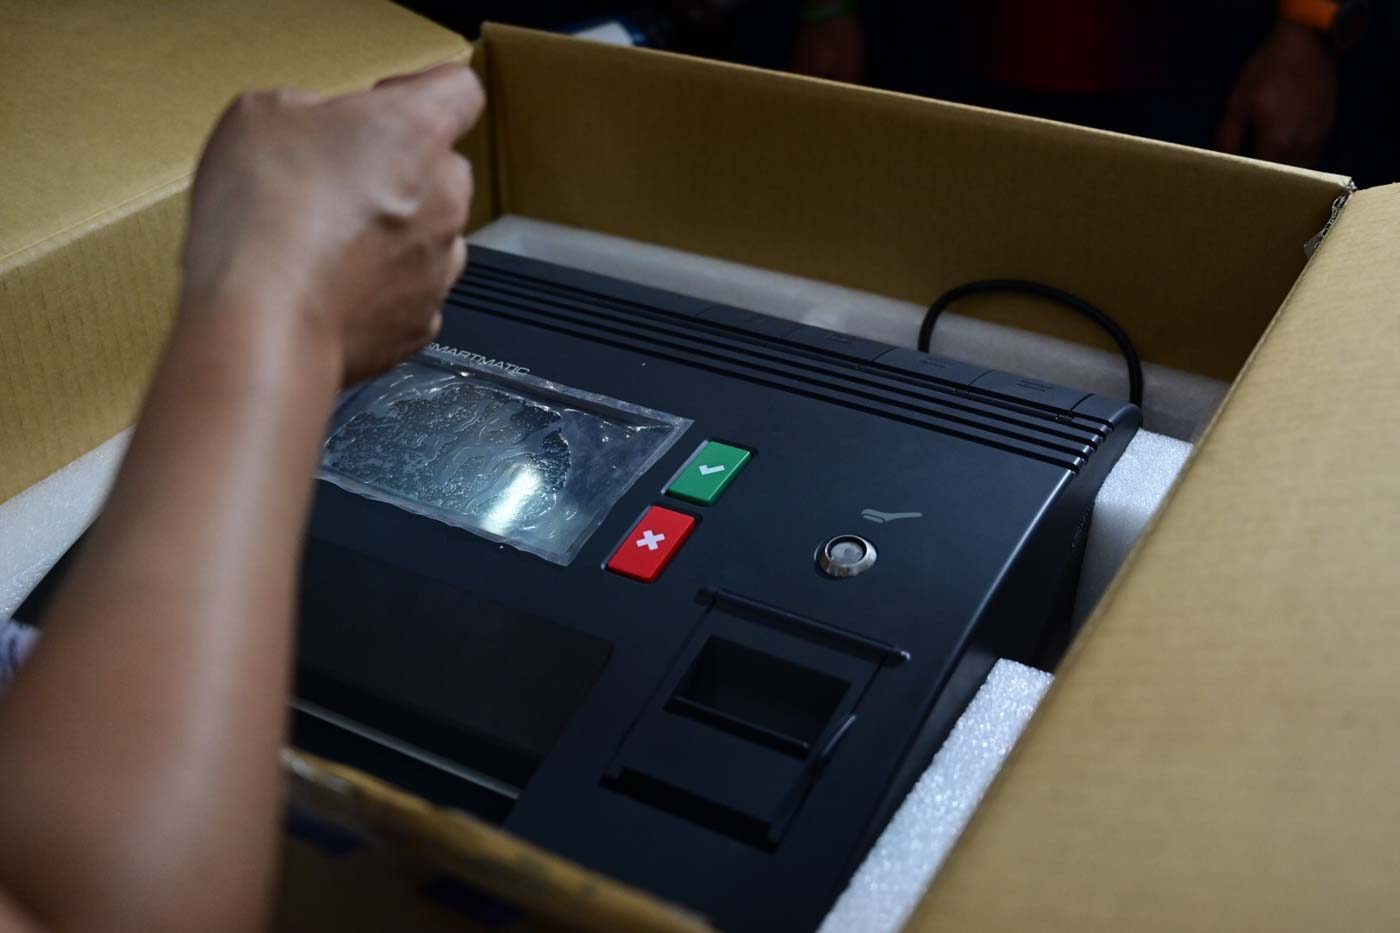 Comelec suspects ‘wear and tear’ in defective voting machines